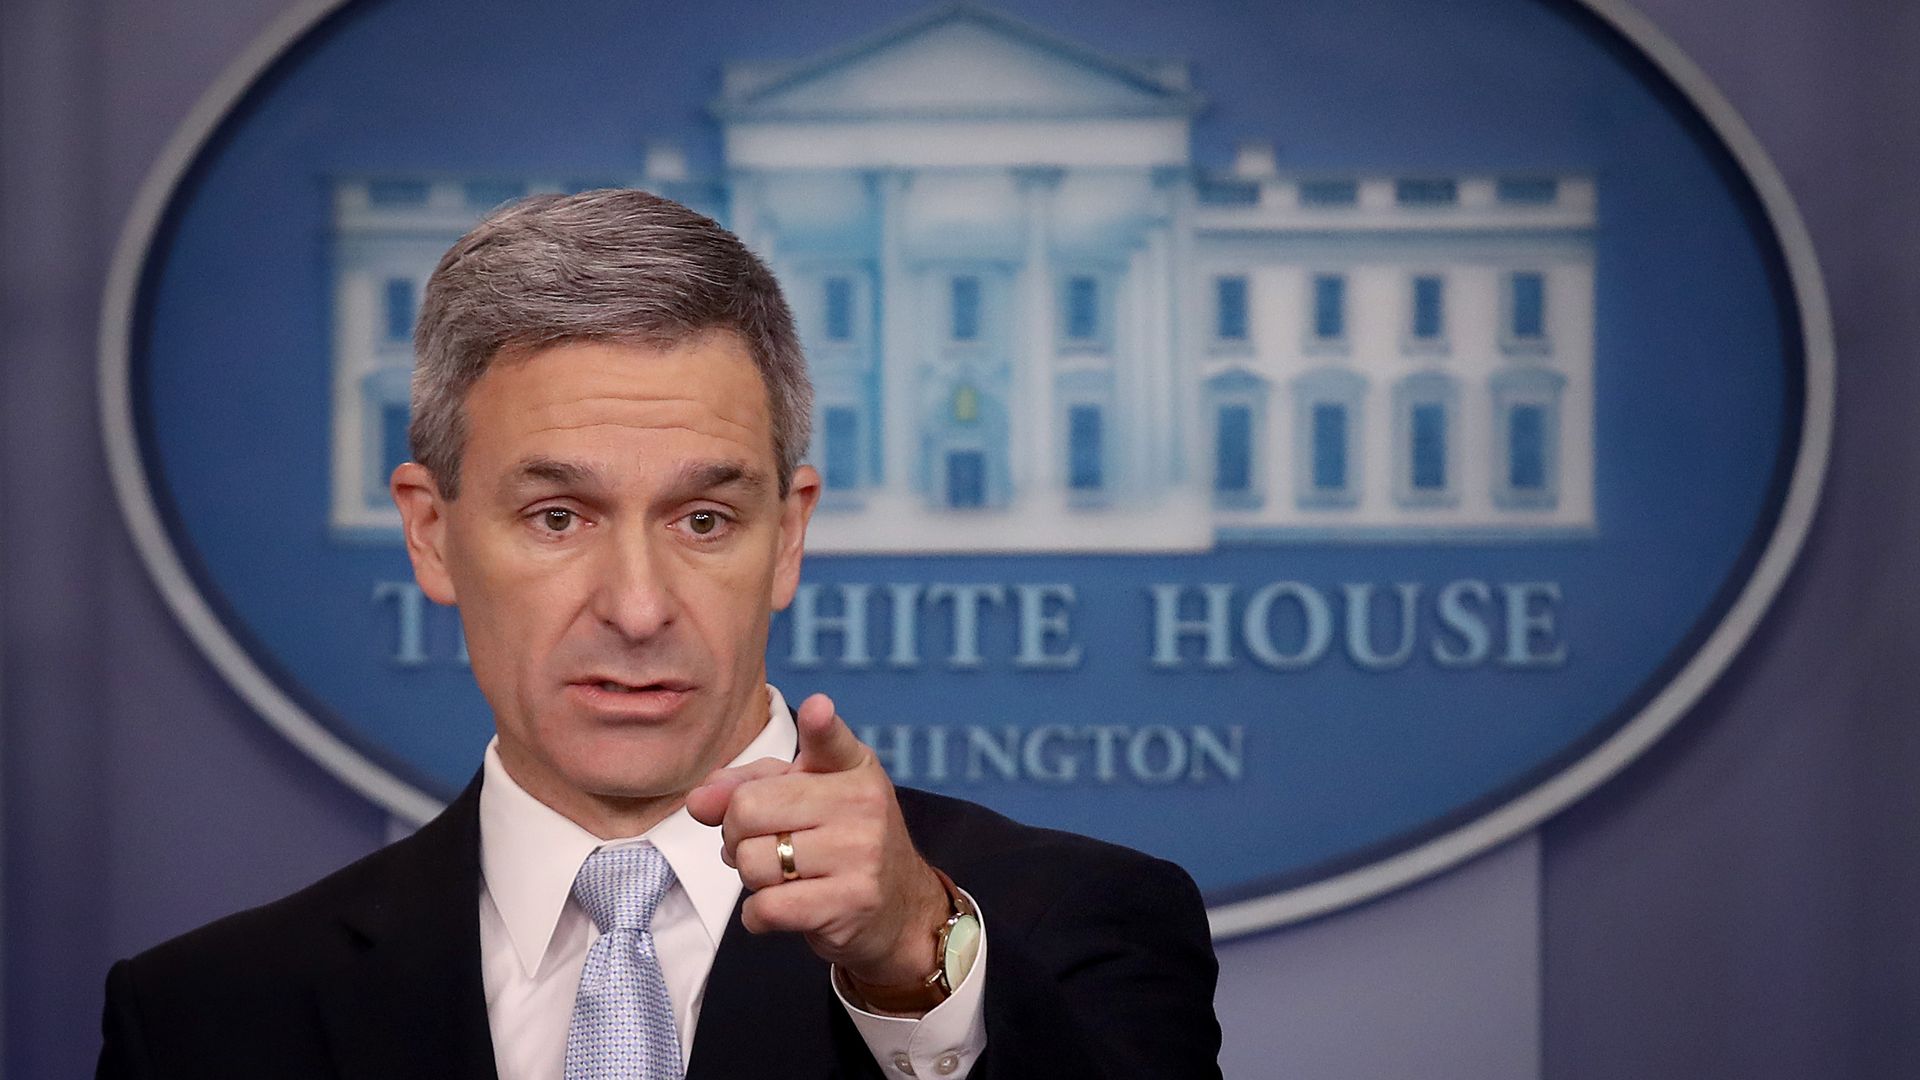 Ken Cuccinelli speaking from the White House press briefing room.